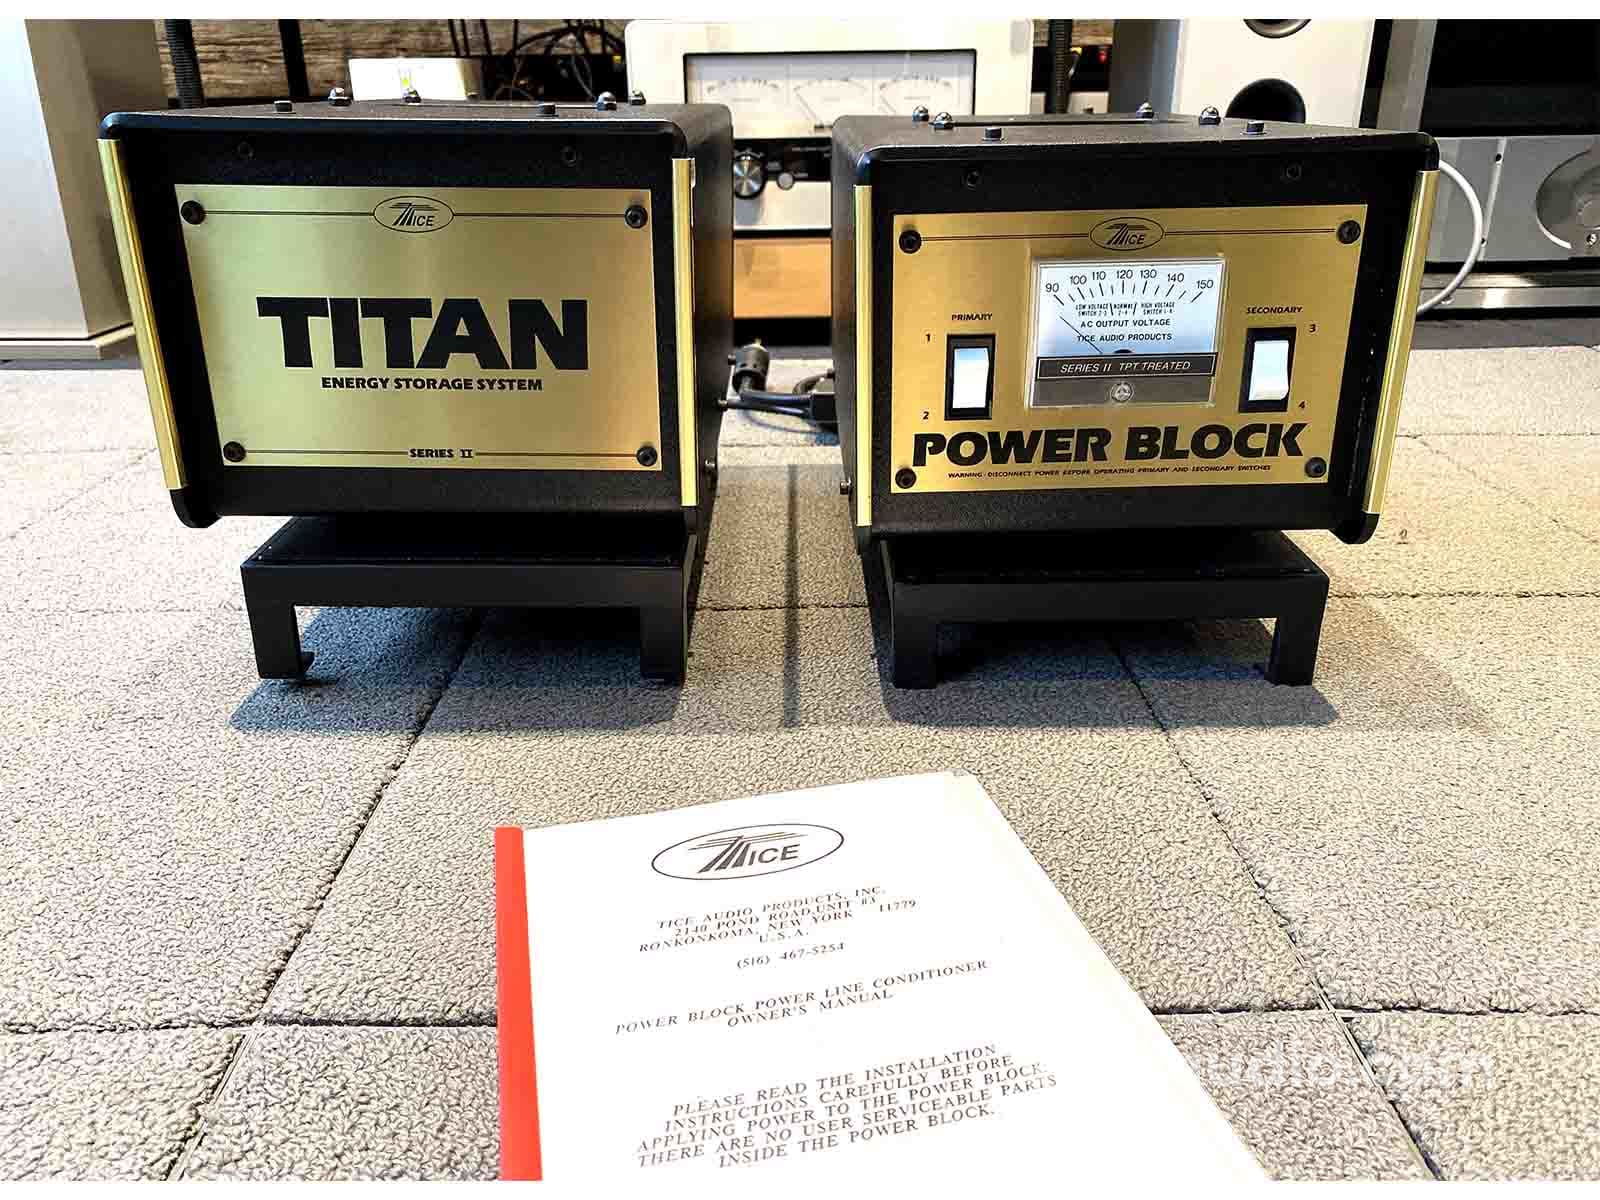 Tice Series Ii Power Block And Titan Energy Storage System - 2 Piece Conditioner With Stands